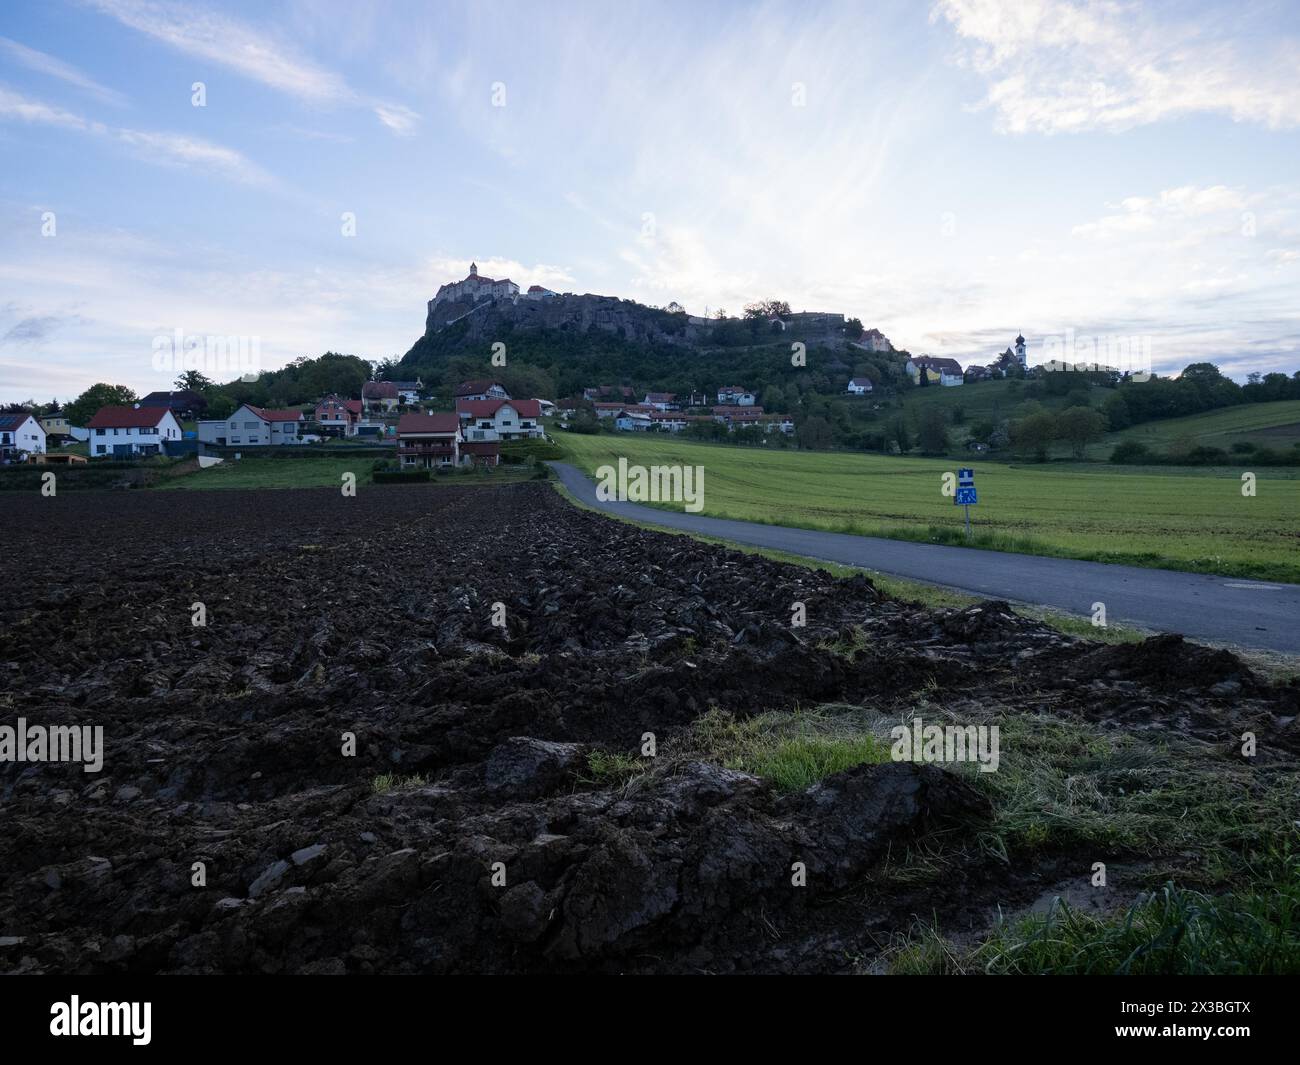 Early morning, path leading to Riegersburg Castle, field in front, Riegersburg Castle, Styrian volcanic region, Styria, Austria, Europe Stock Photo